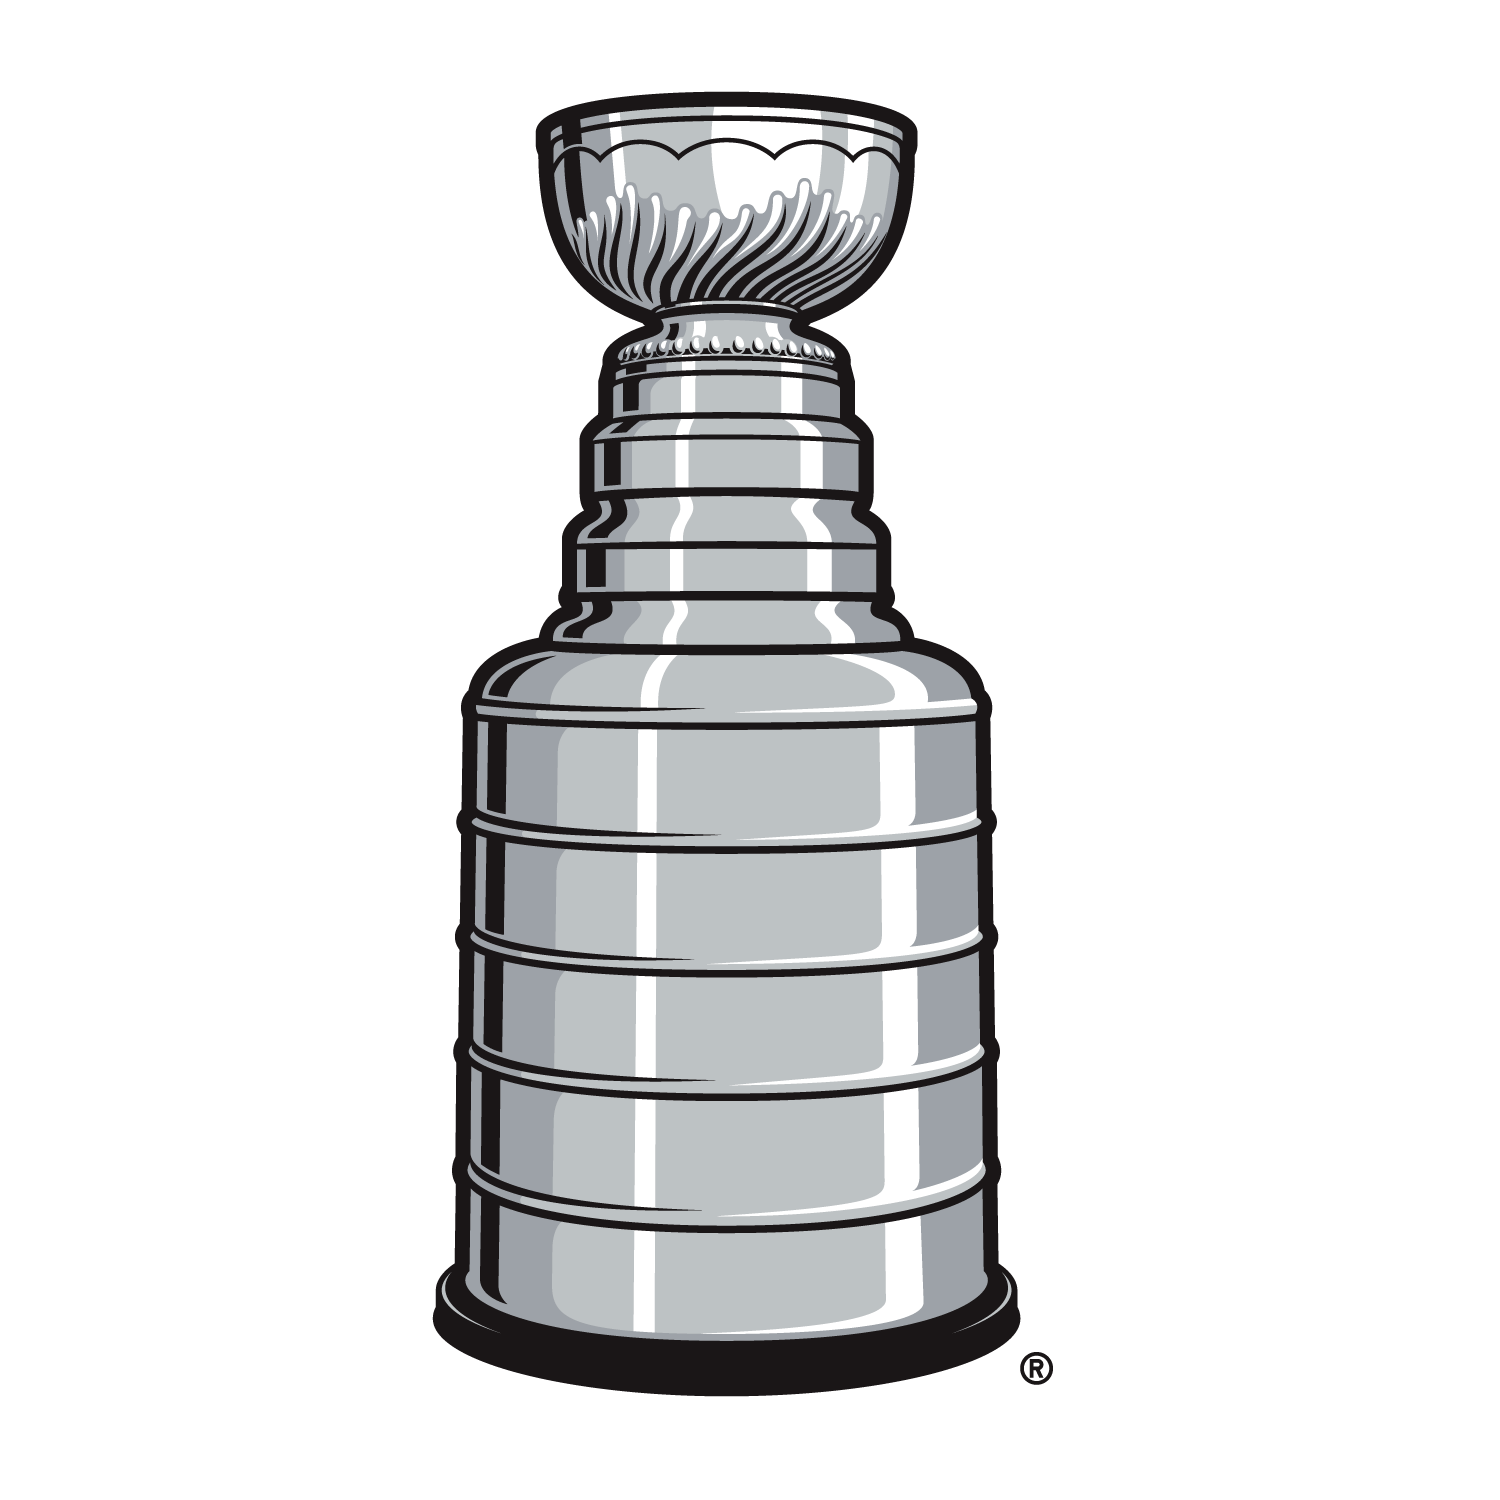 stanley_cup